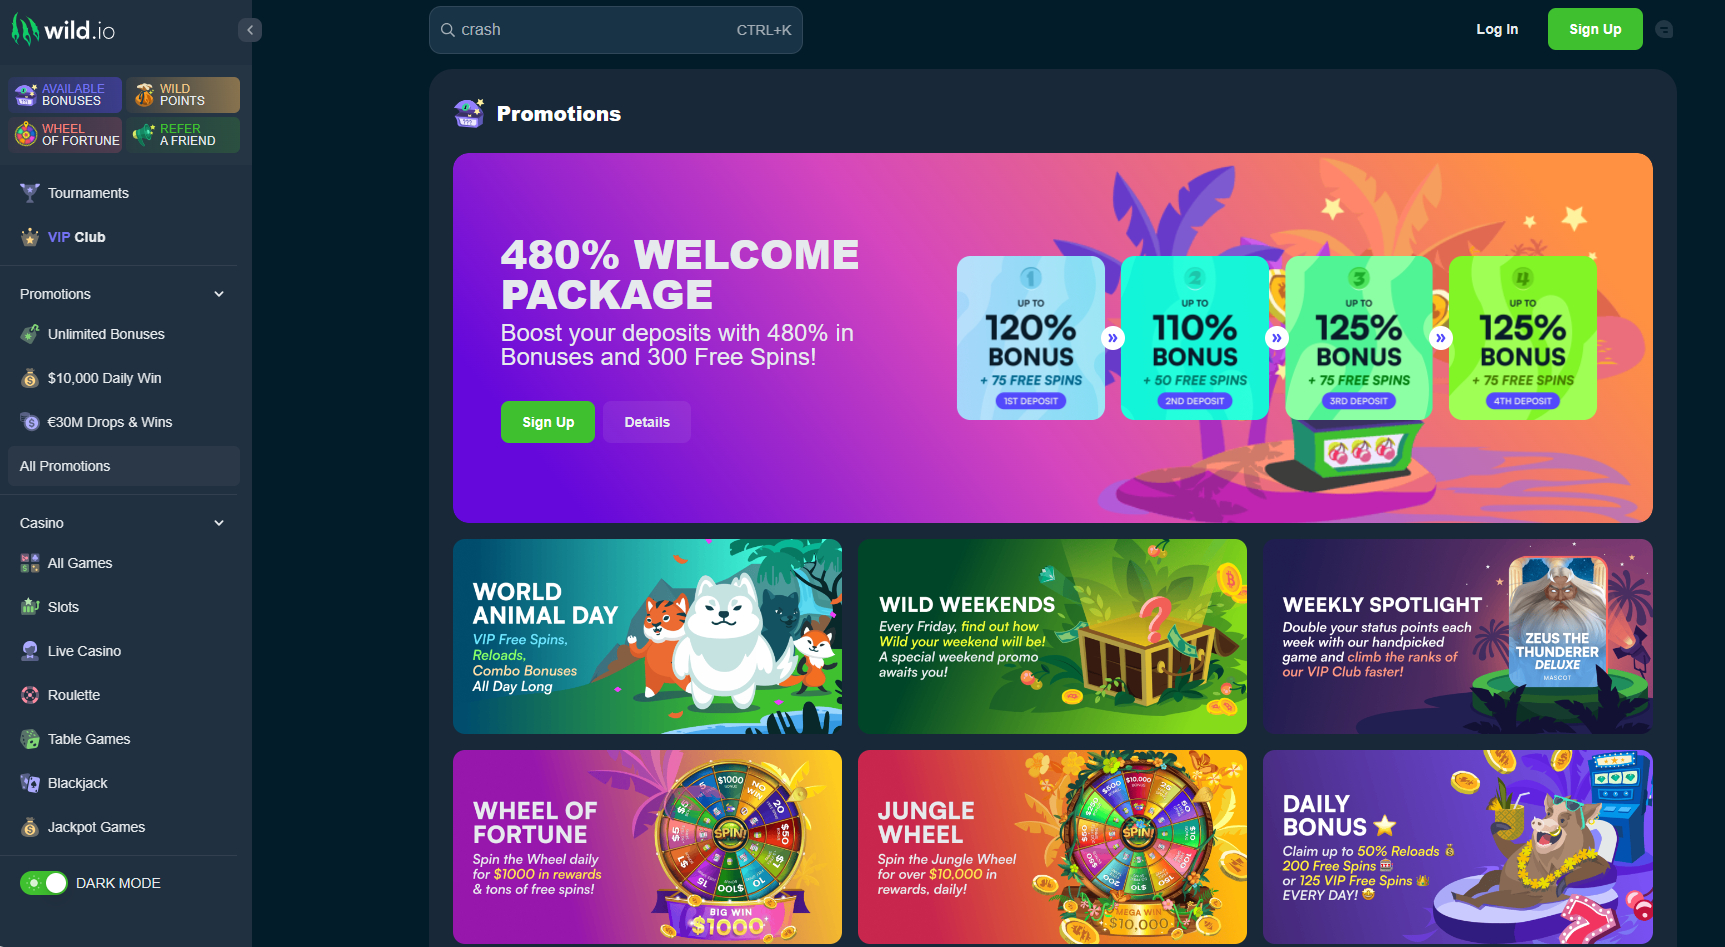 Wild.io welcome package